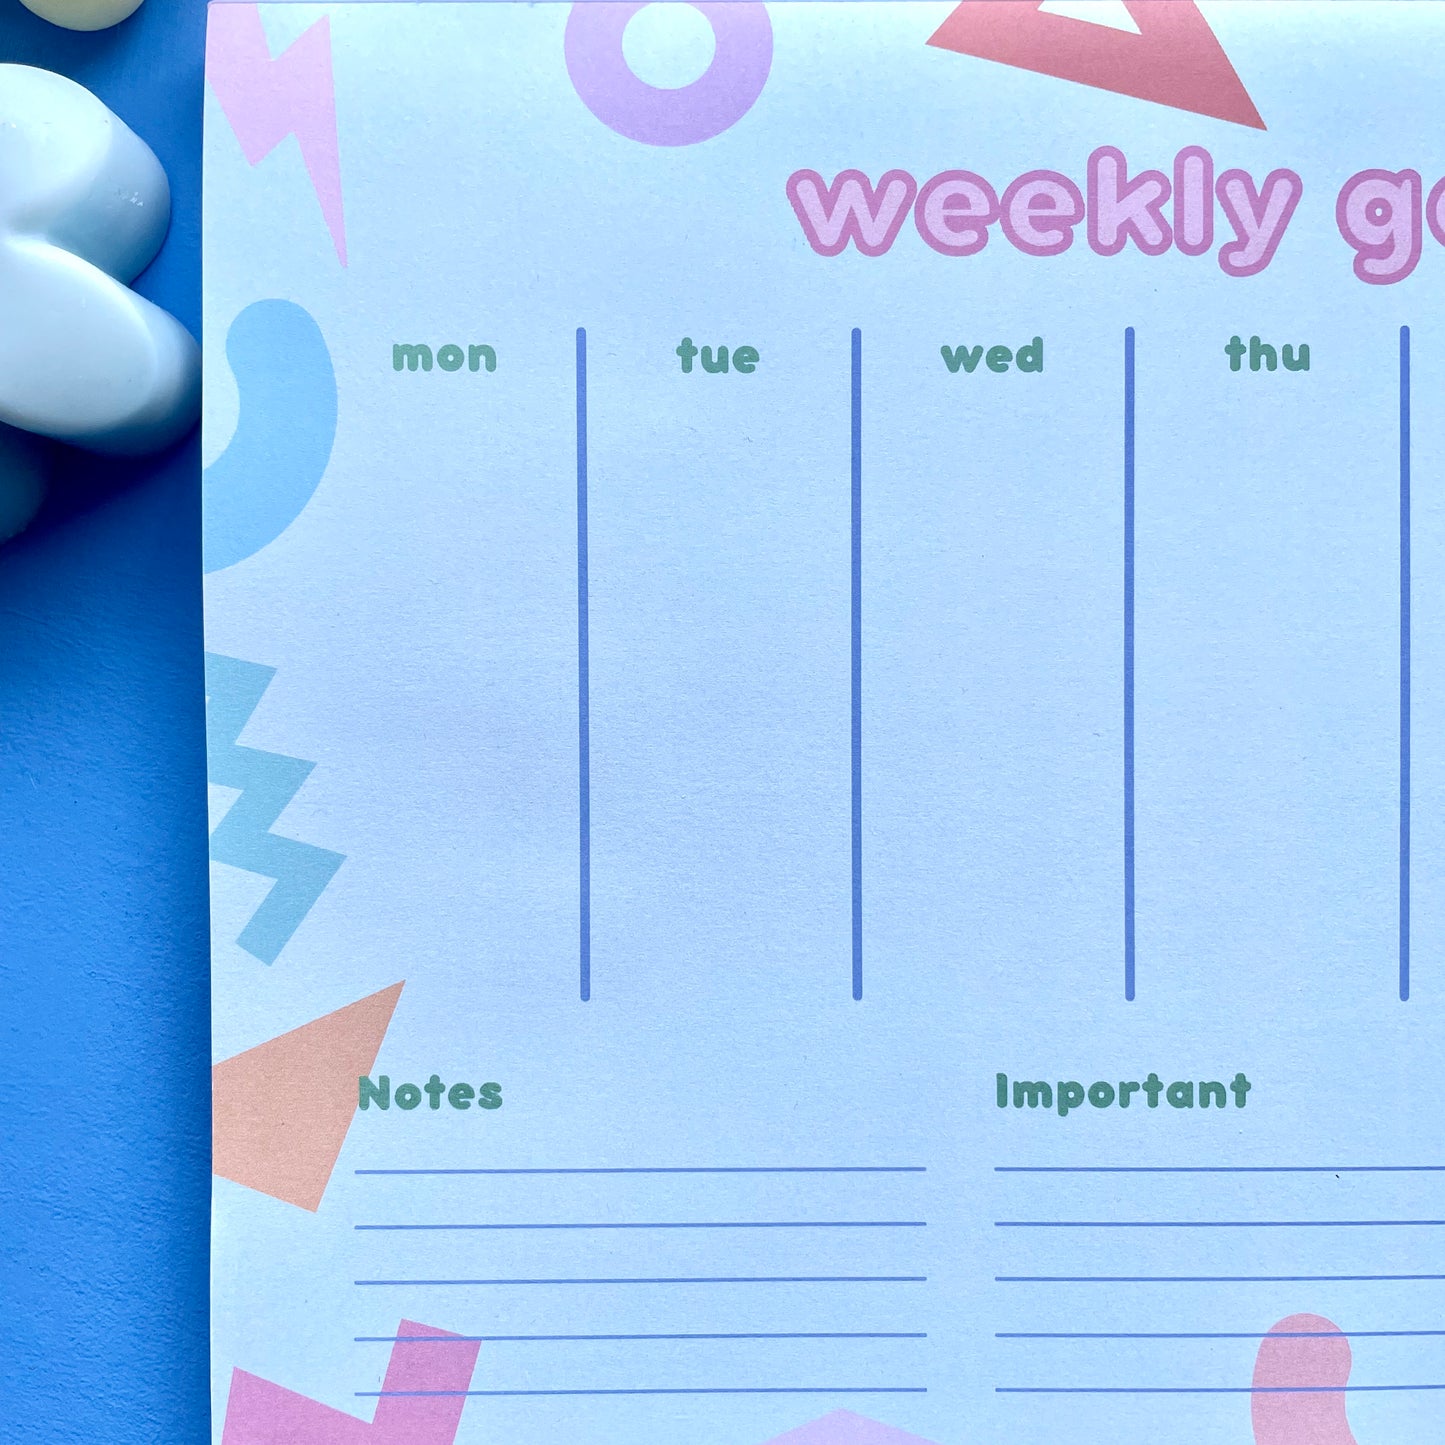 Weekly Goals A4 Planner Pad